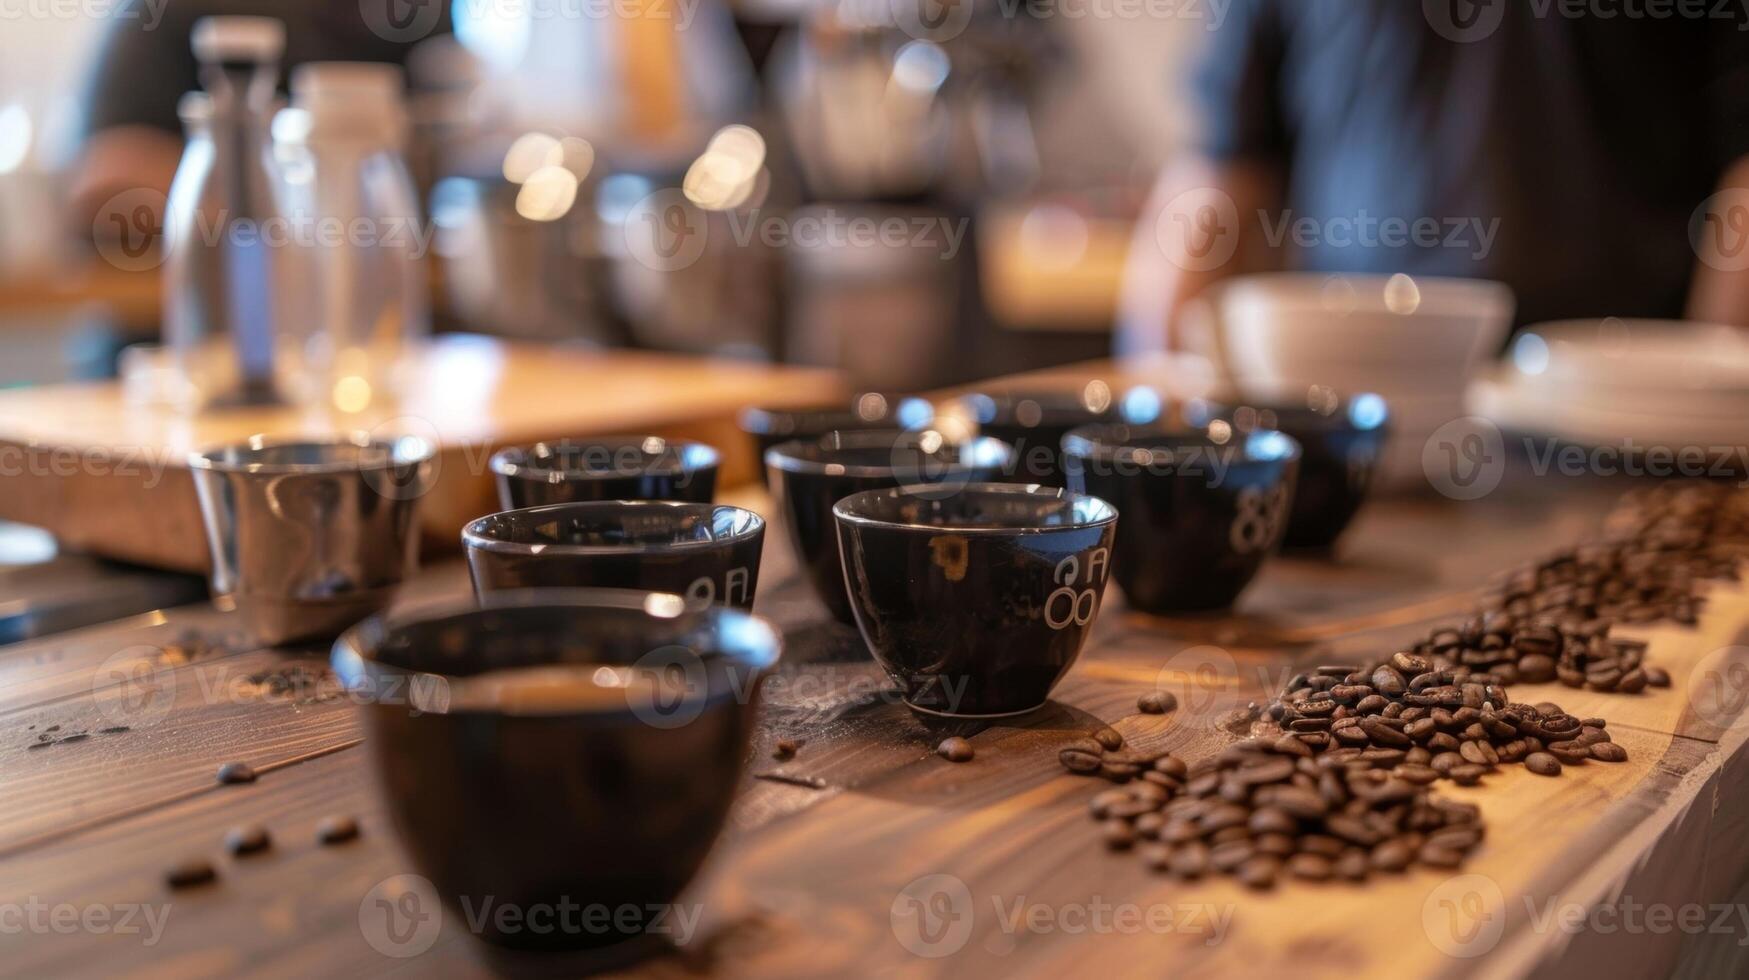 A coffee cupping session with small groups tasting and evaluating different blends with notes and ratings to help refine the final product photo